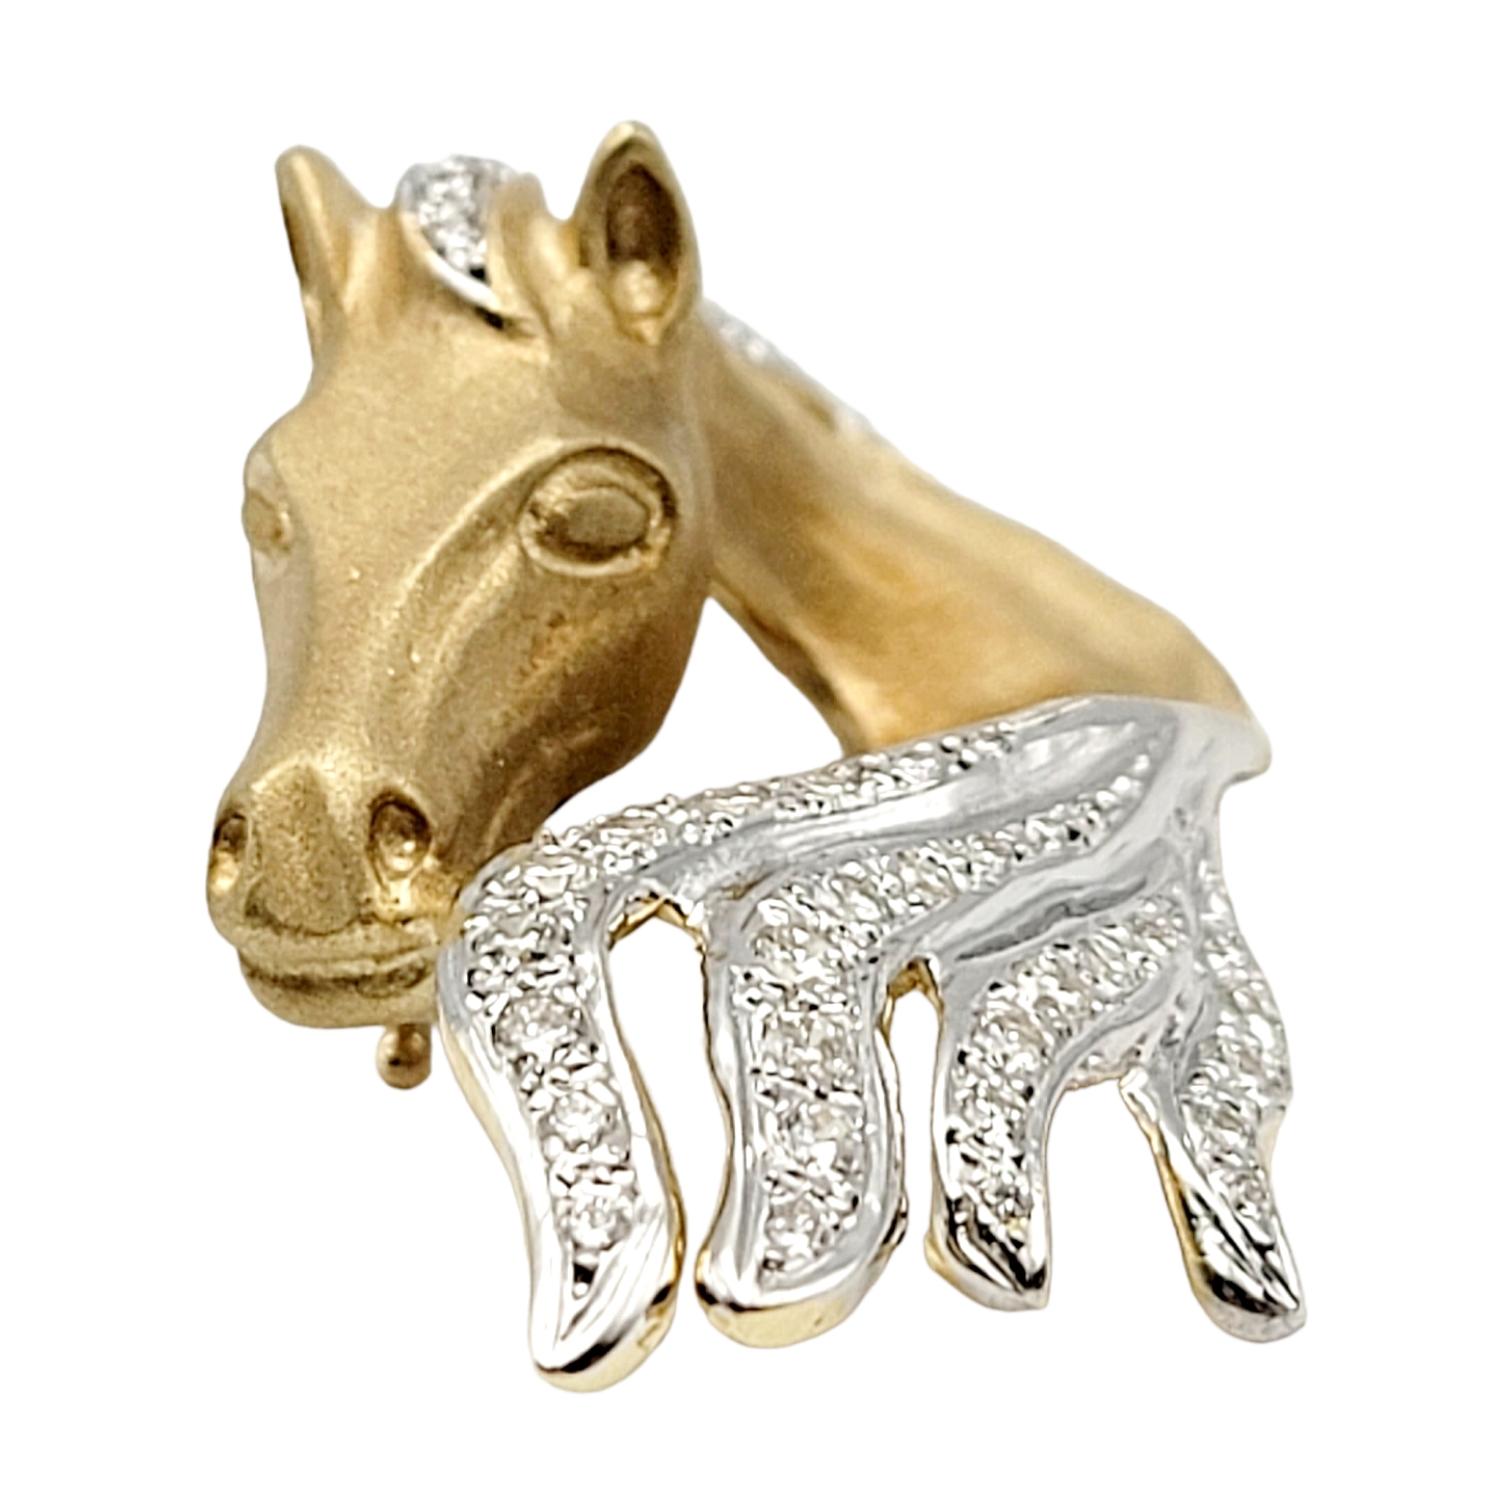 Calling all equestrian lovers! This incredible horse head pendant is a wearable work of art.  With its intricately carved design and sparkling natural diamonds, this rare and decorative piece will make a stunning statement and a wonderful